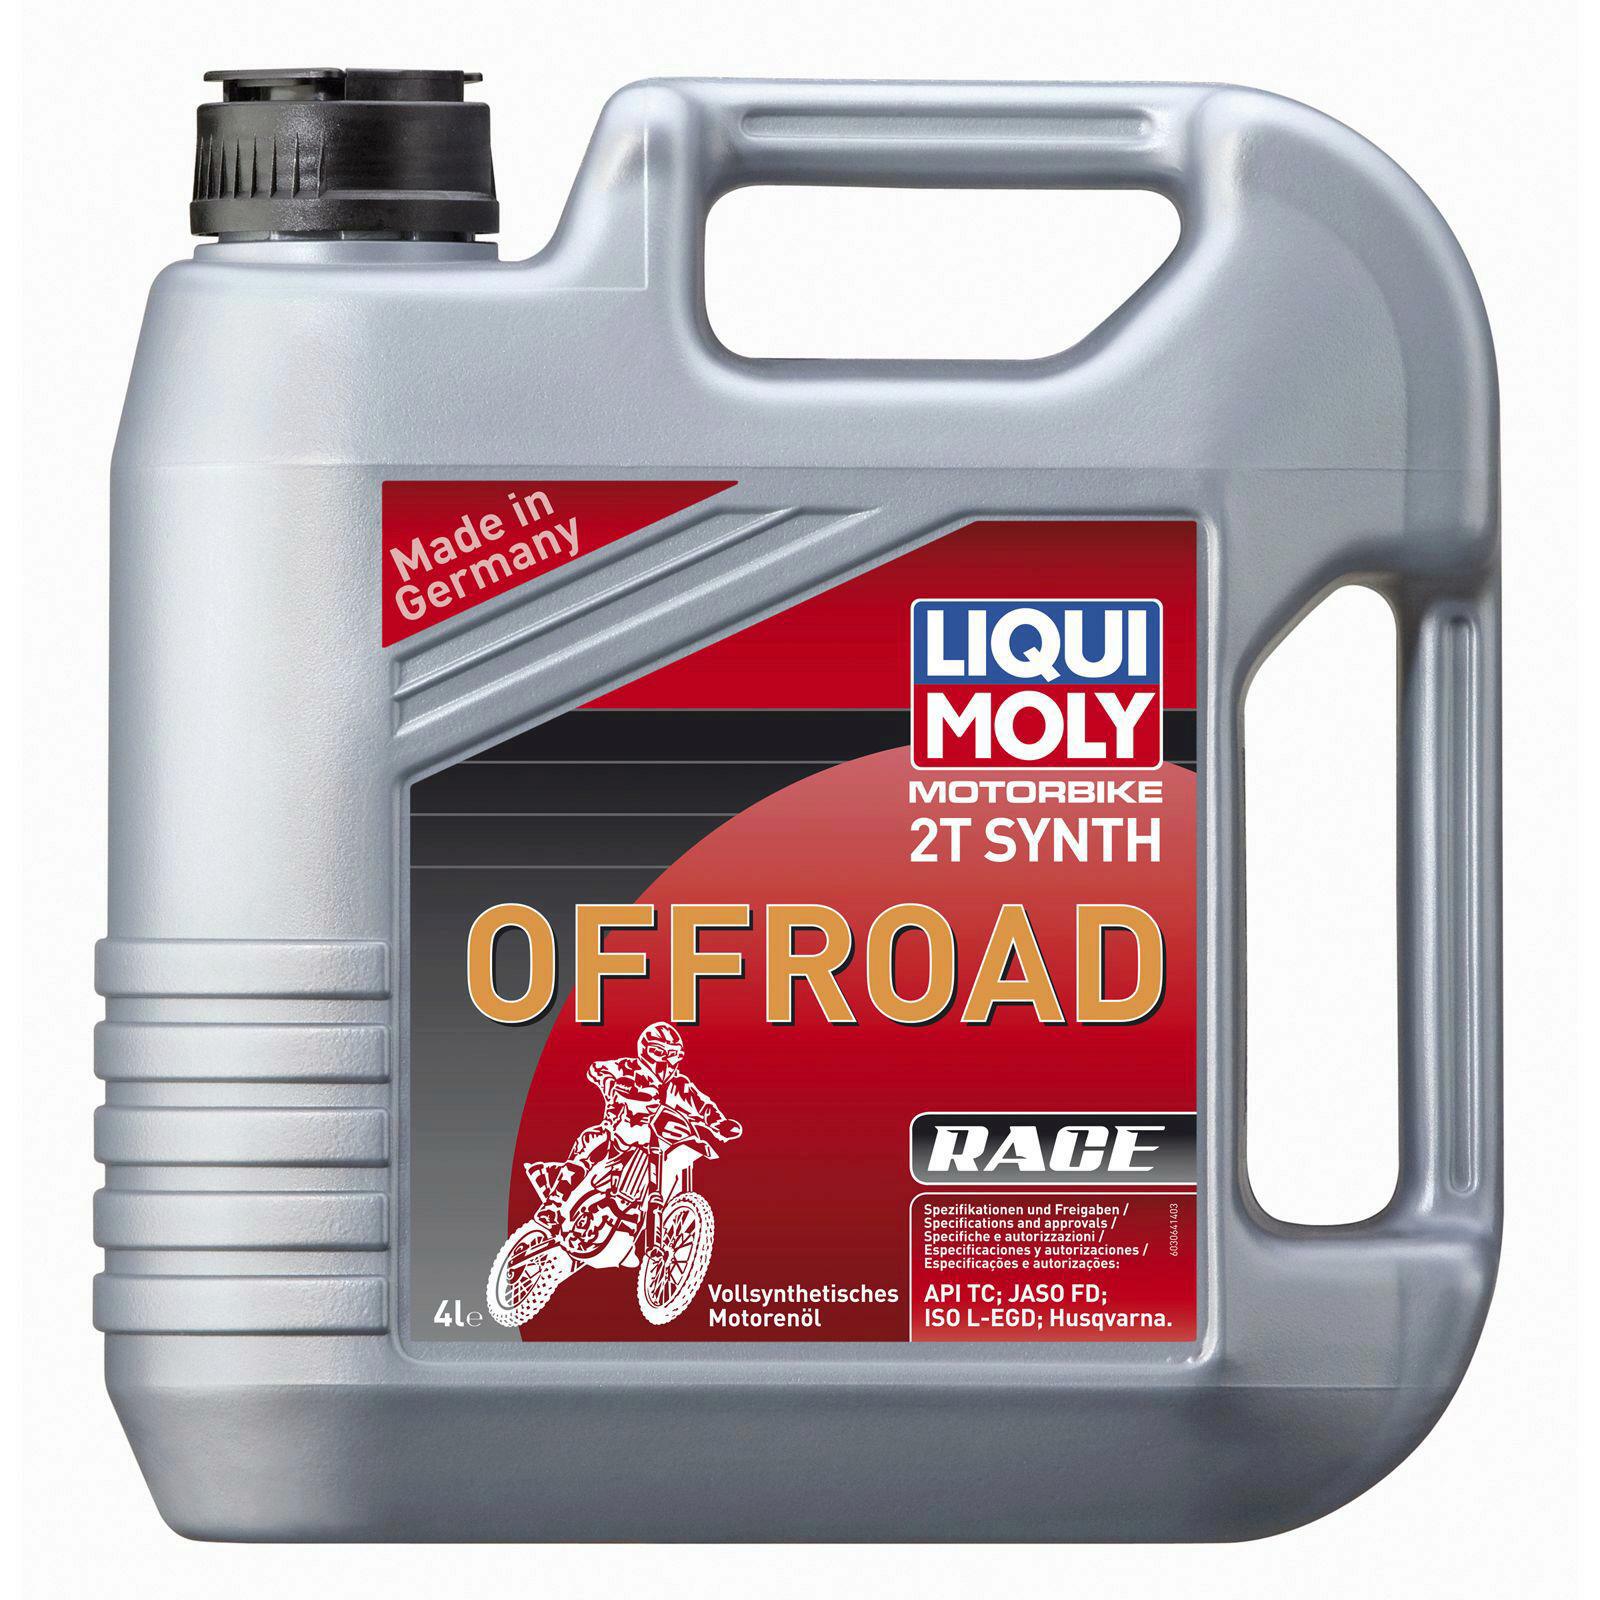 Liqui Moly Motorbike 2T Synth Offroad Race 4L